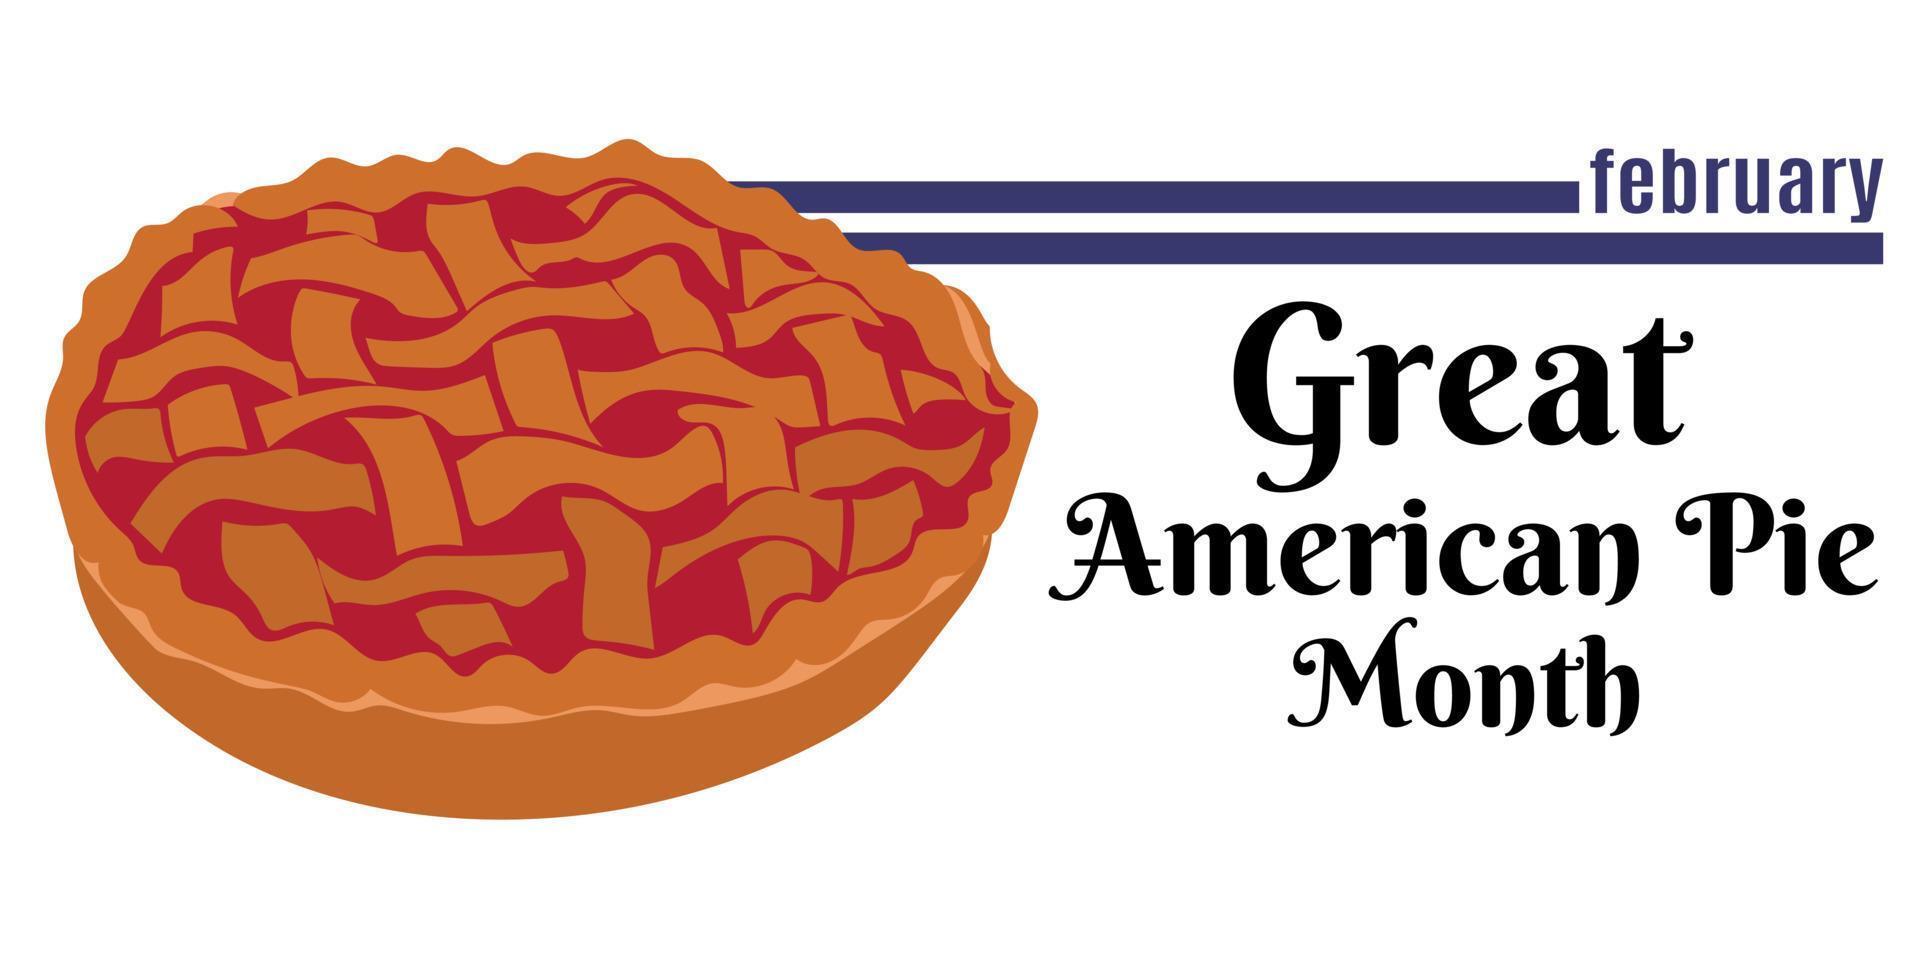 Great American Pie Month, idea for a horizontal design for an event or menu design vector